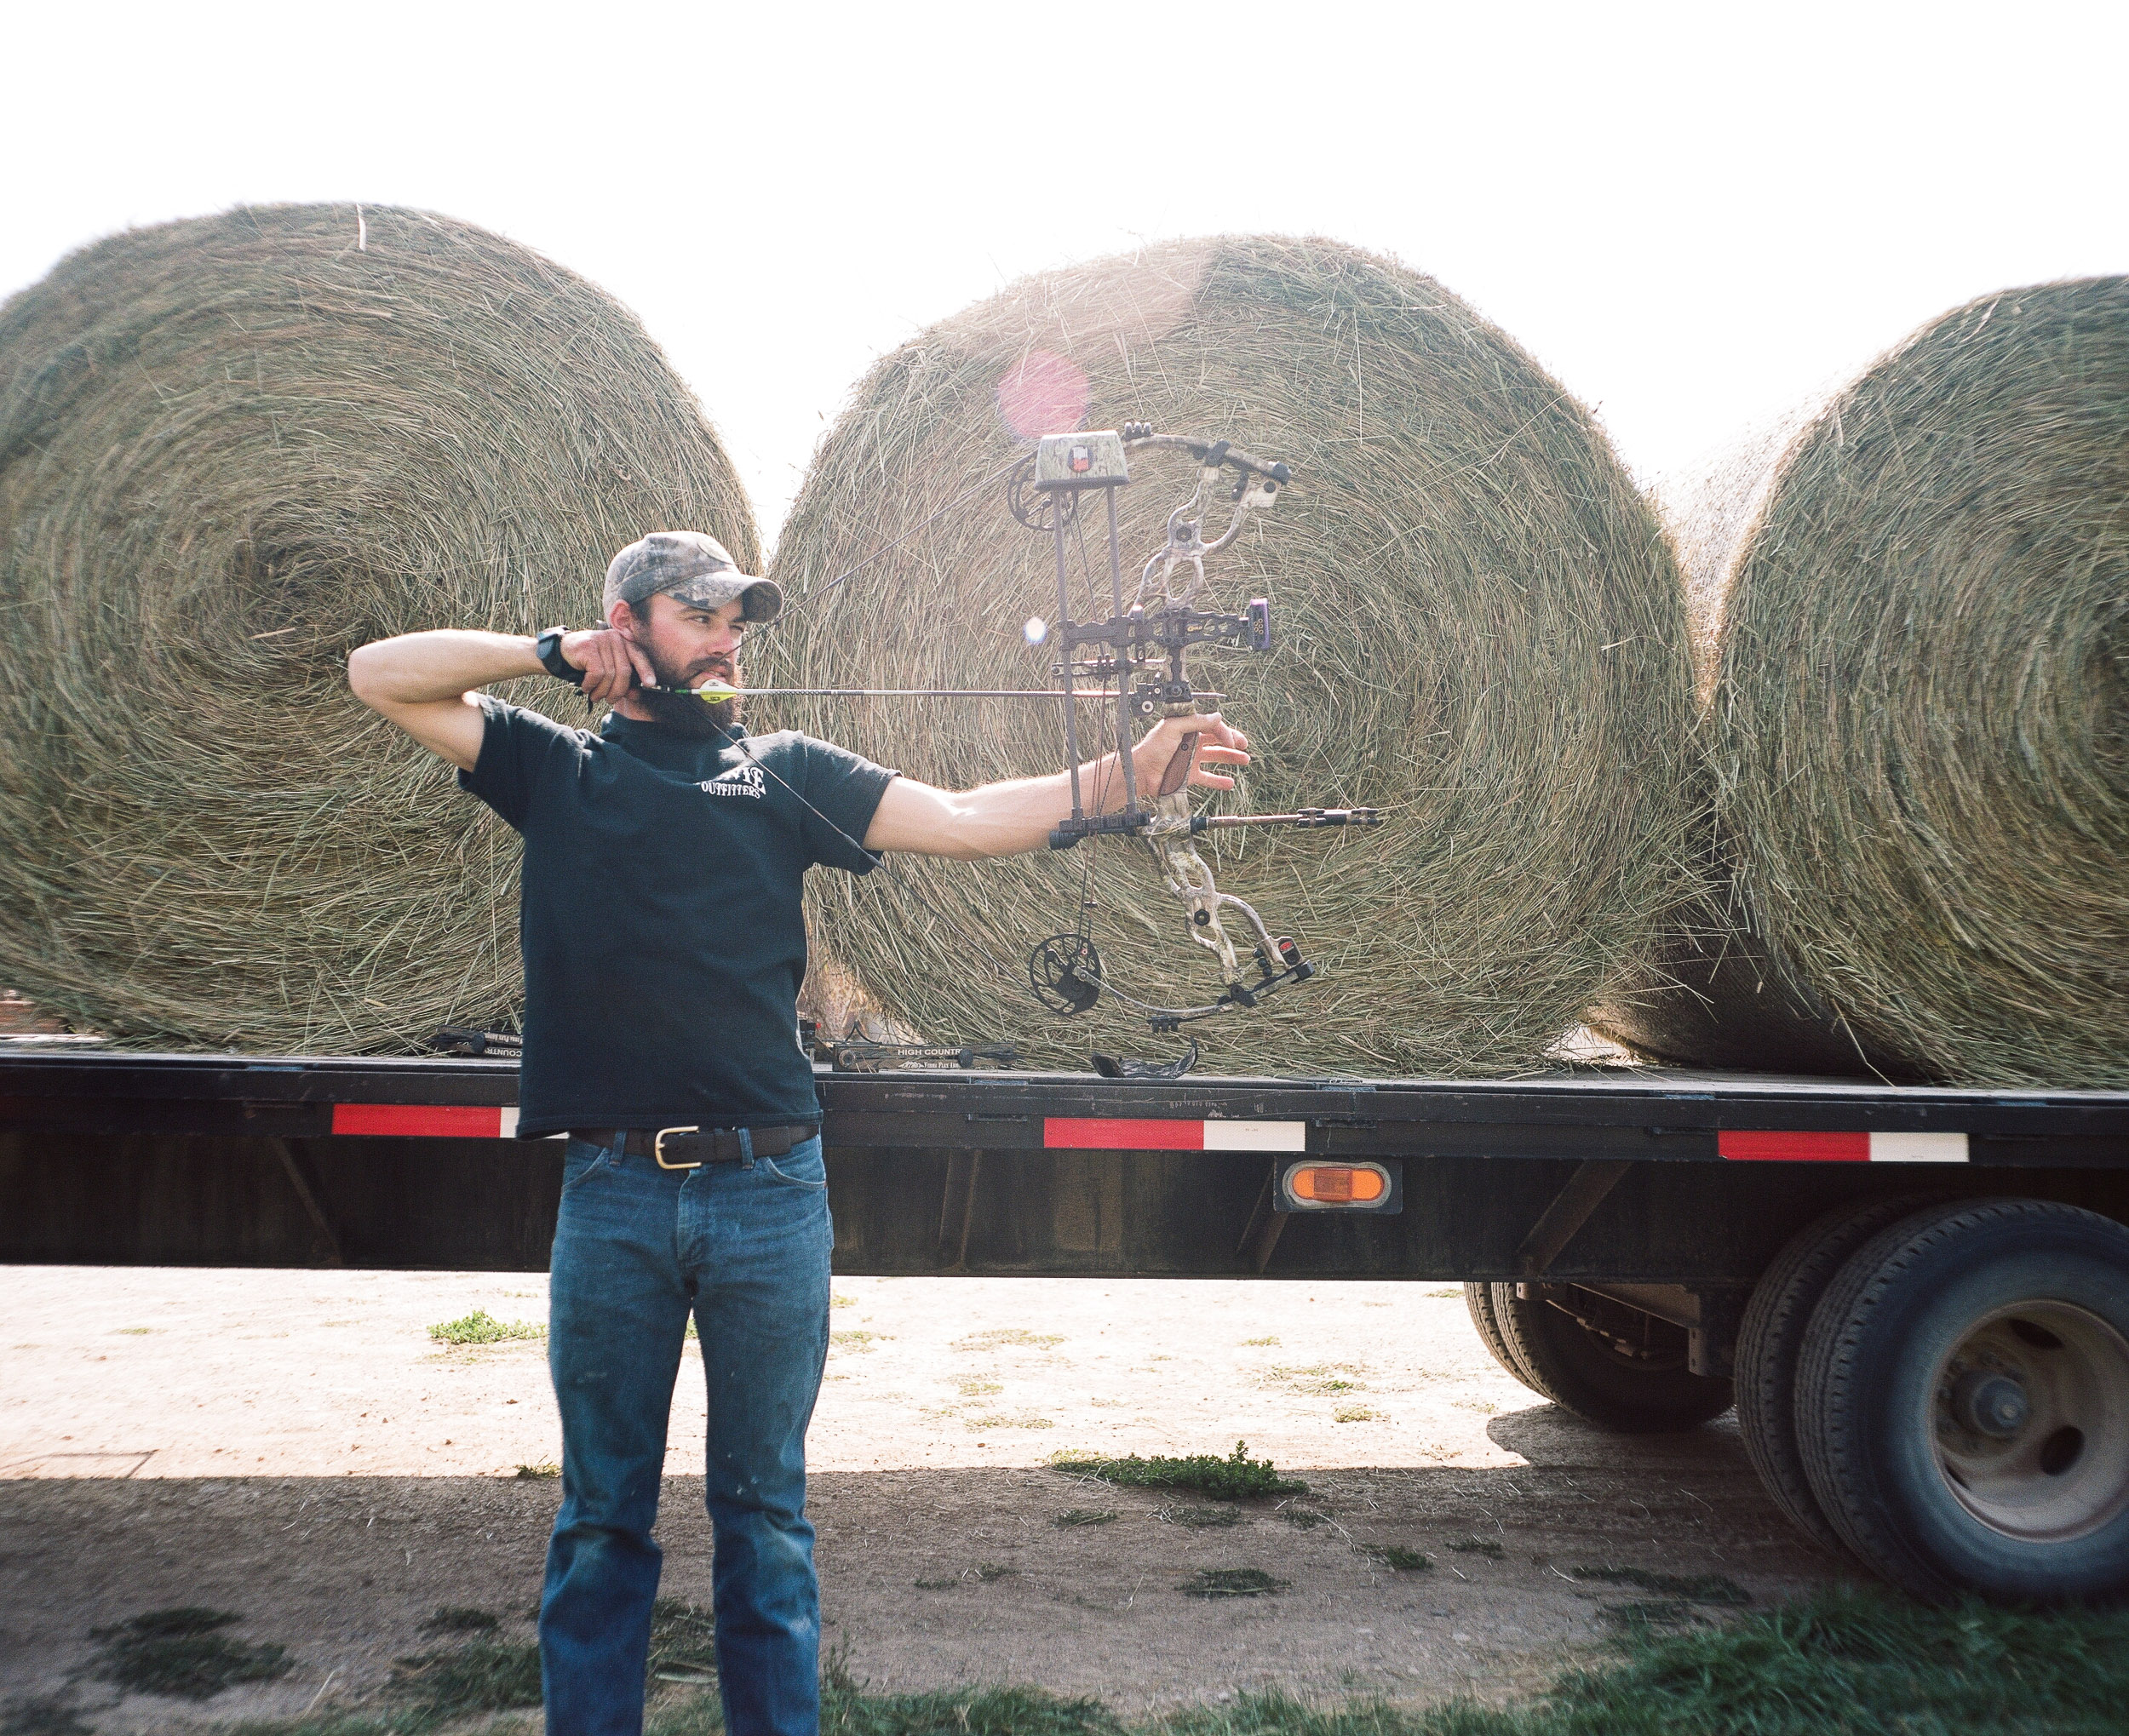 Man shooting a bow in front of bales of hay